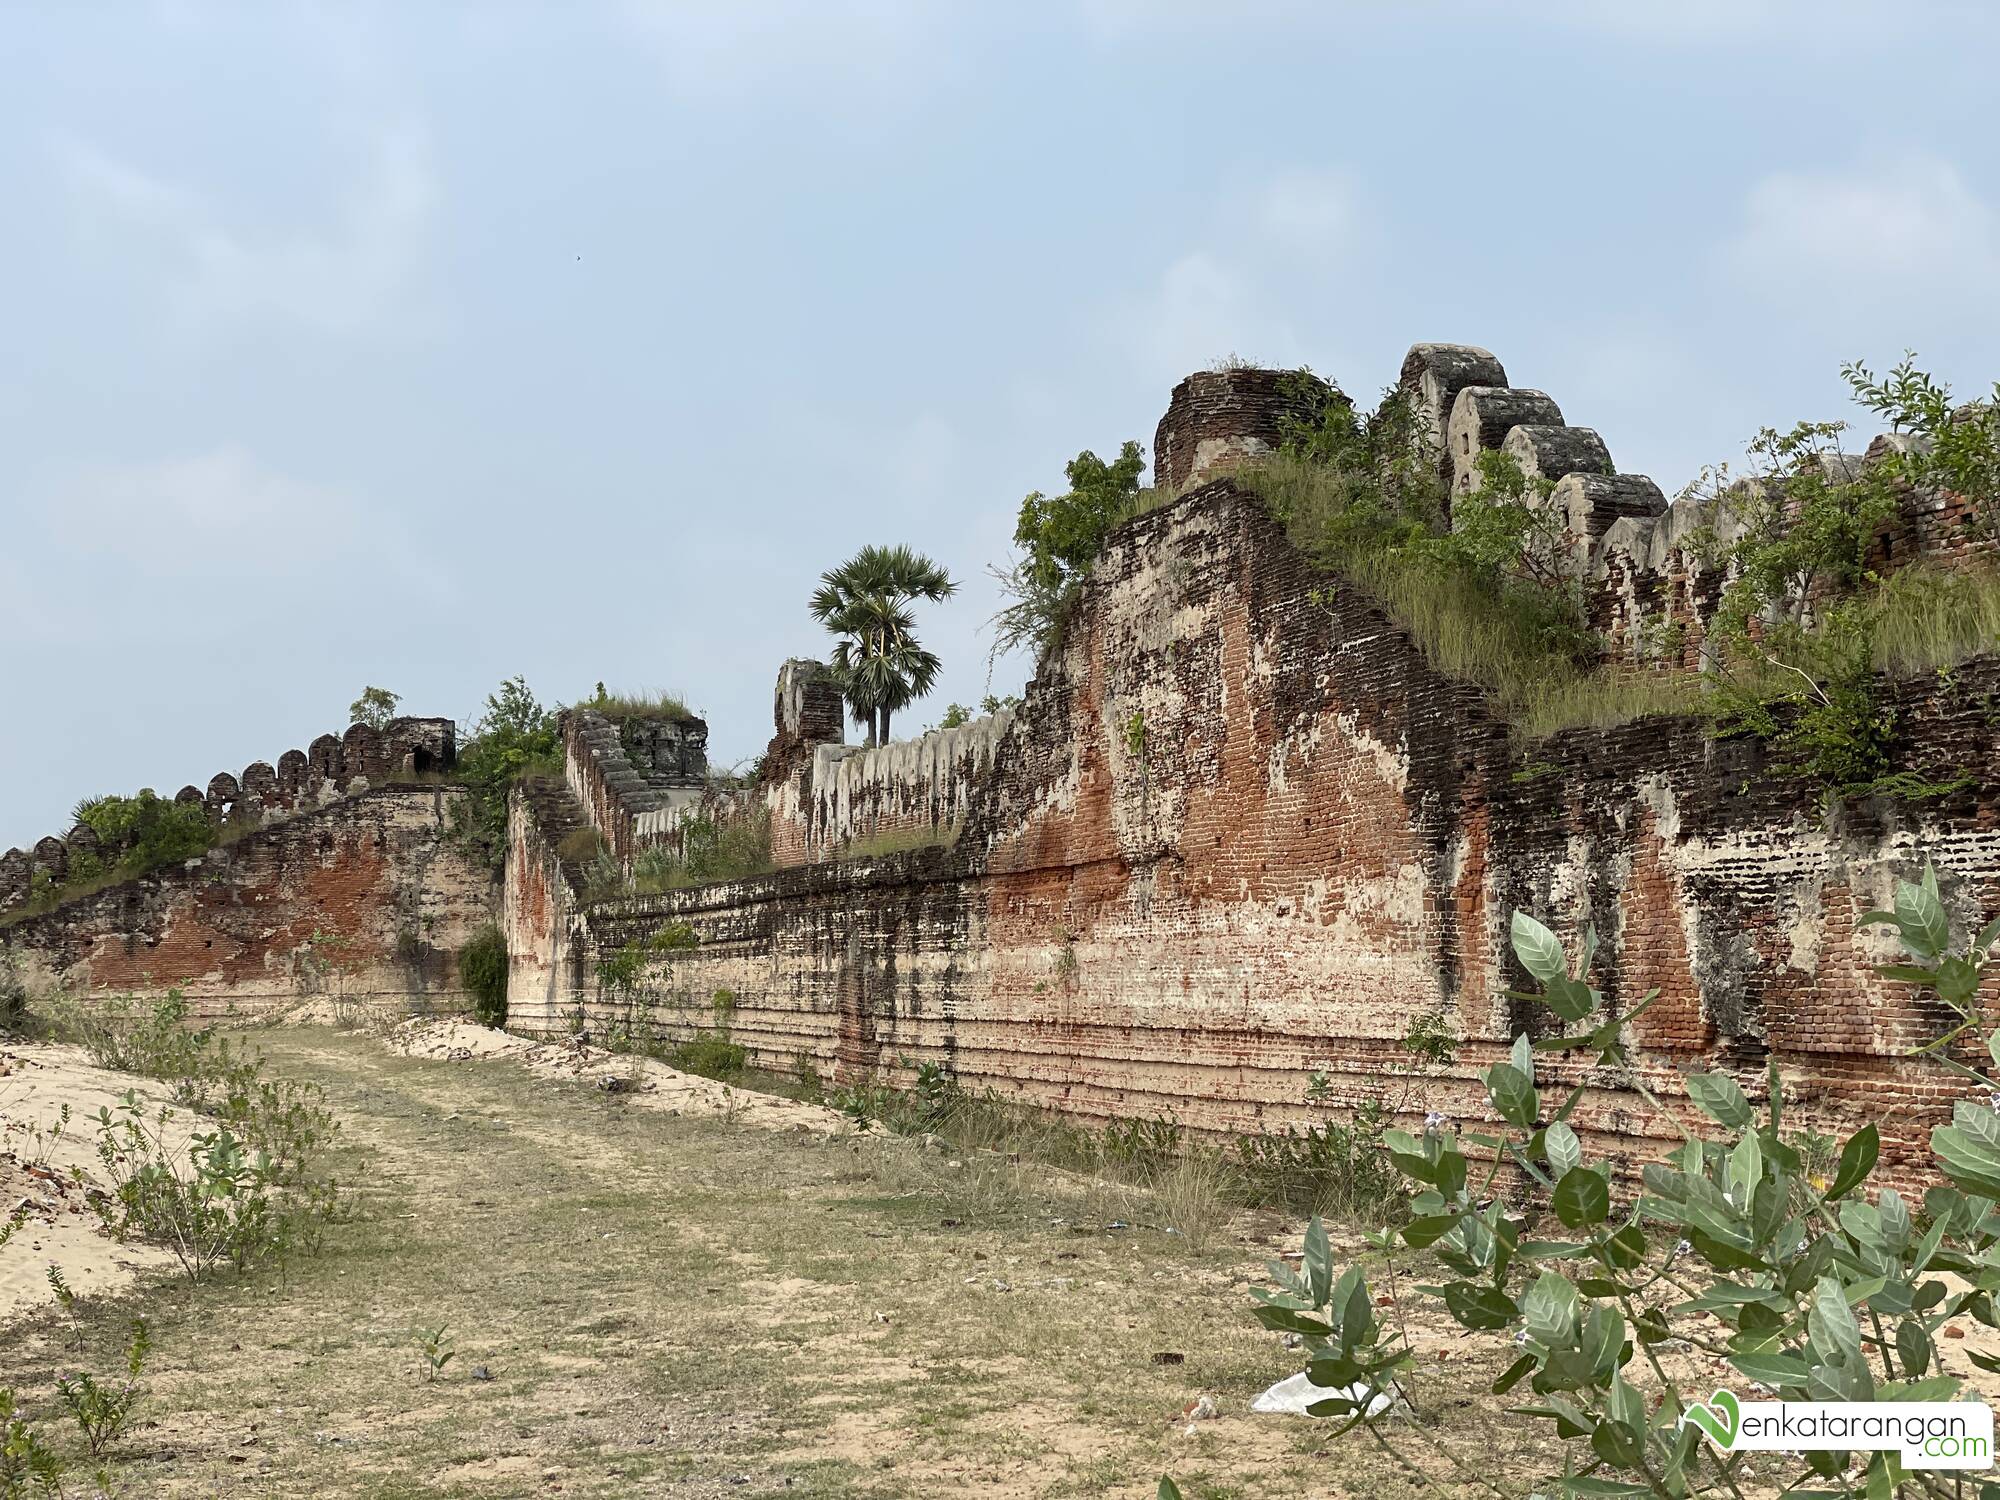 The long tall fort walls can be seen intact in this section